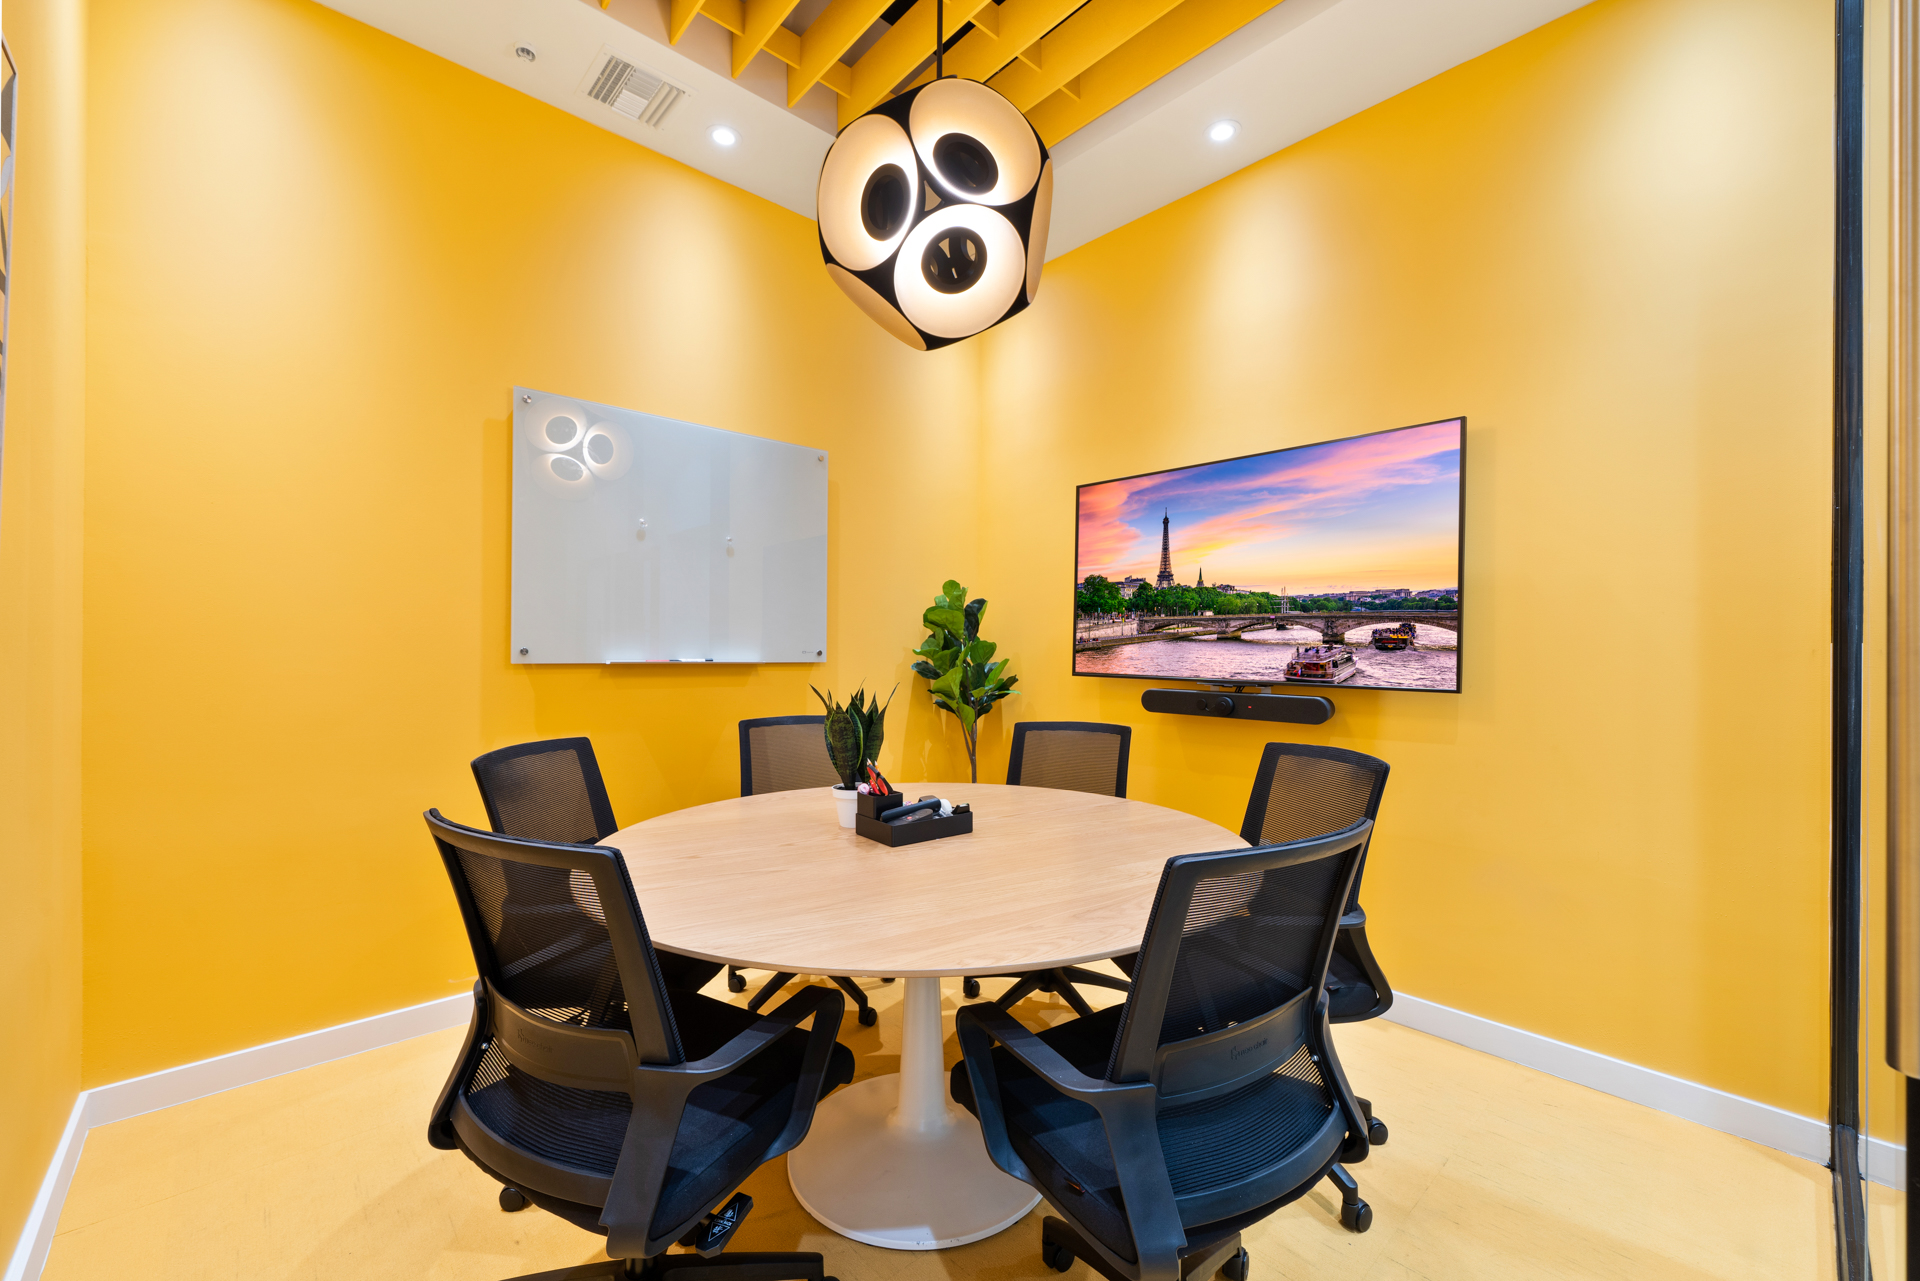 Meeting room with a round table and chairs around it